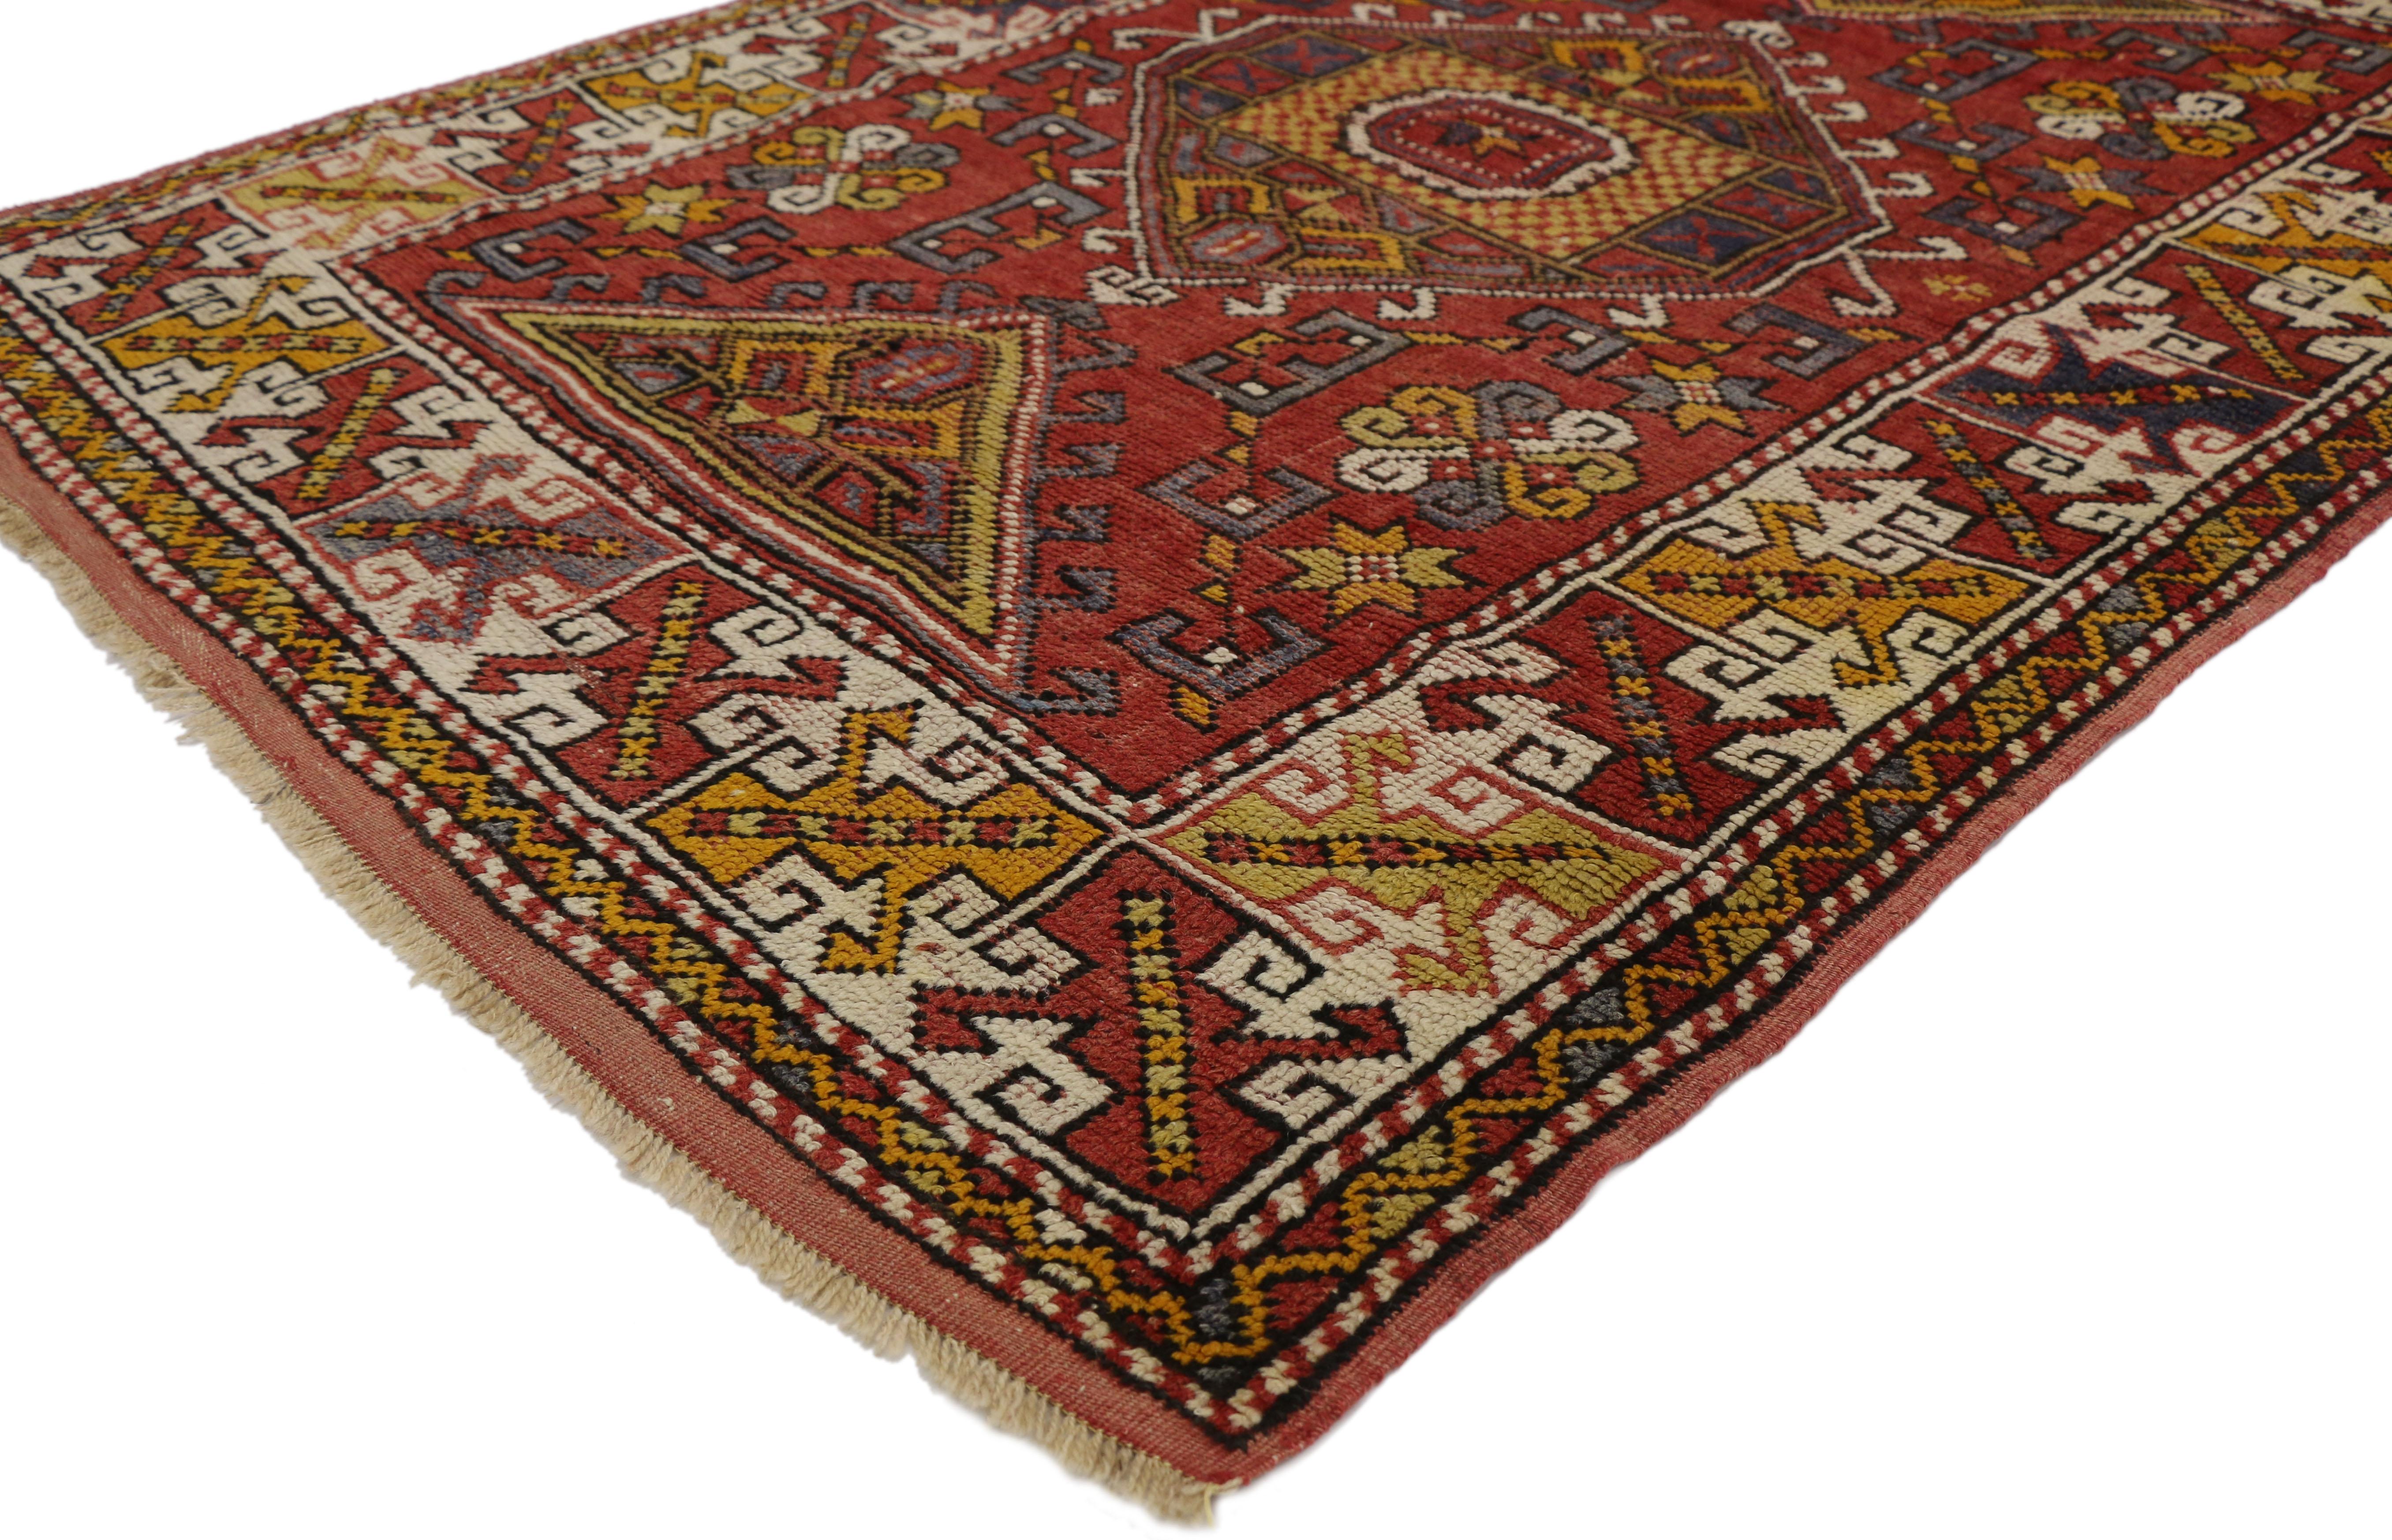 77311 vintage Turkish Oushak Accent rug for Entry, Kitchen, Foyer or Bathroom. This hand knotted wool vintage Turkish Oushak rug features a central hexagonal latch-hook amulet medallion flanked with latch-hook triangles and surrounded by a host of